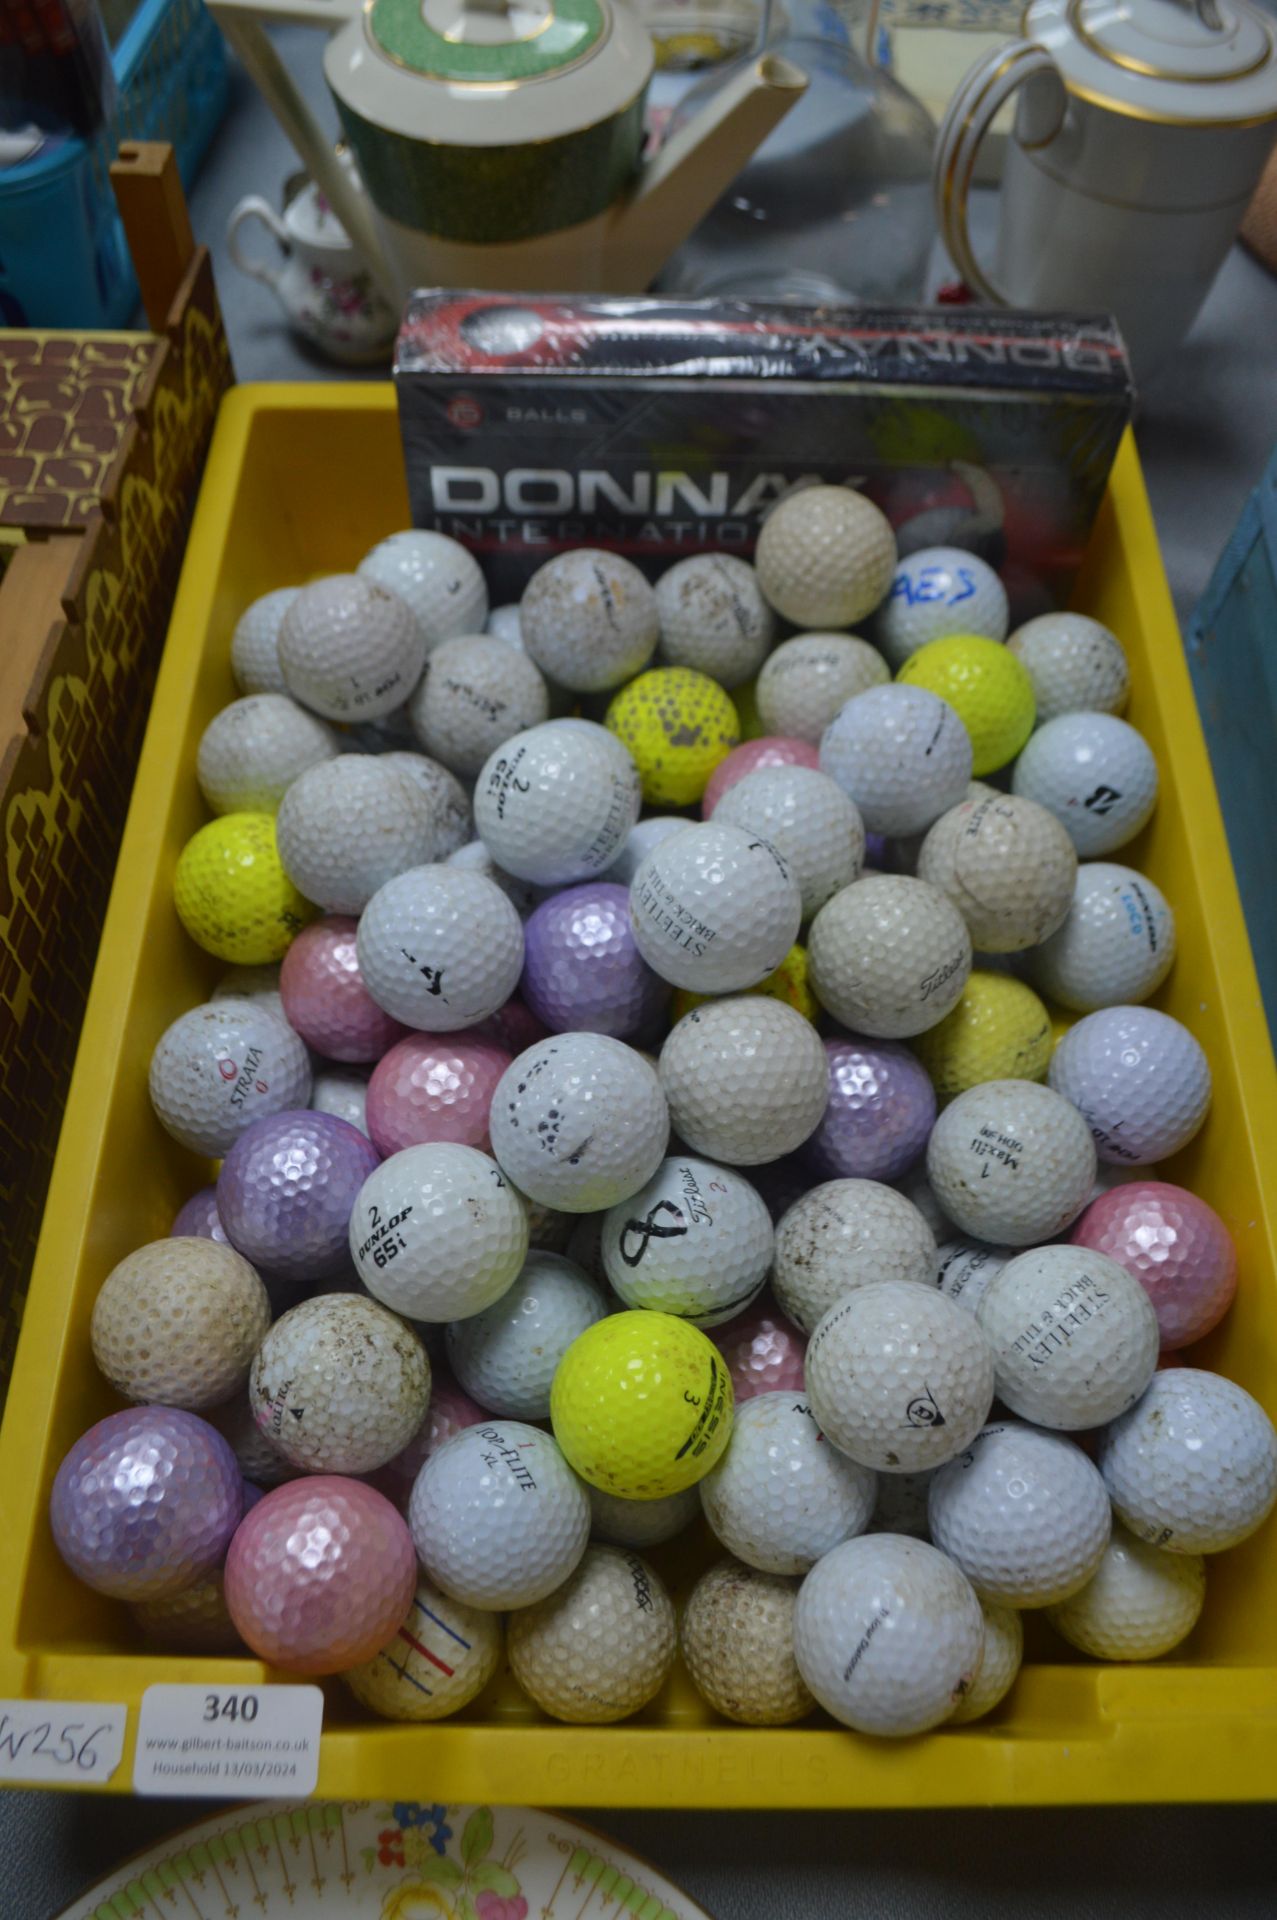 New & Used Golf Balls by Donnay etc.